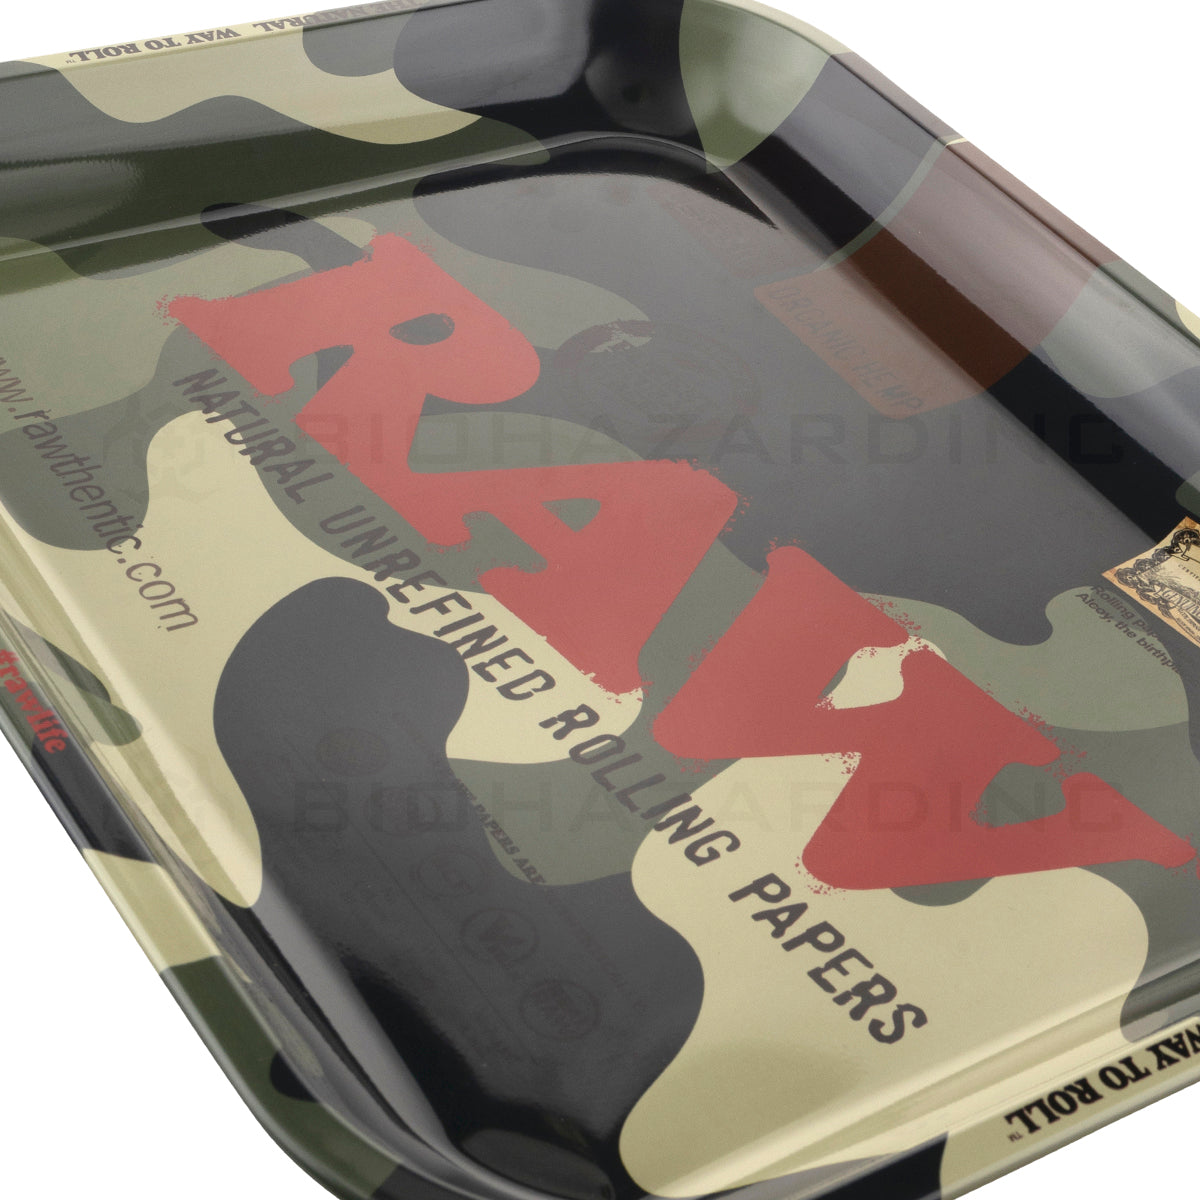 RAW Rolling Tray | Camo | Large - 14in x 11in - Metal Rolling Tray Raw   